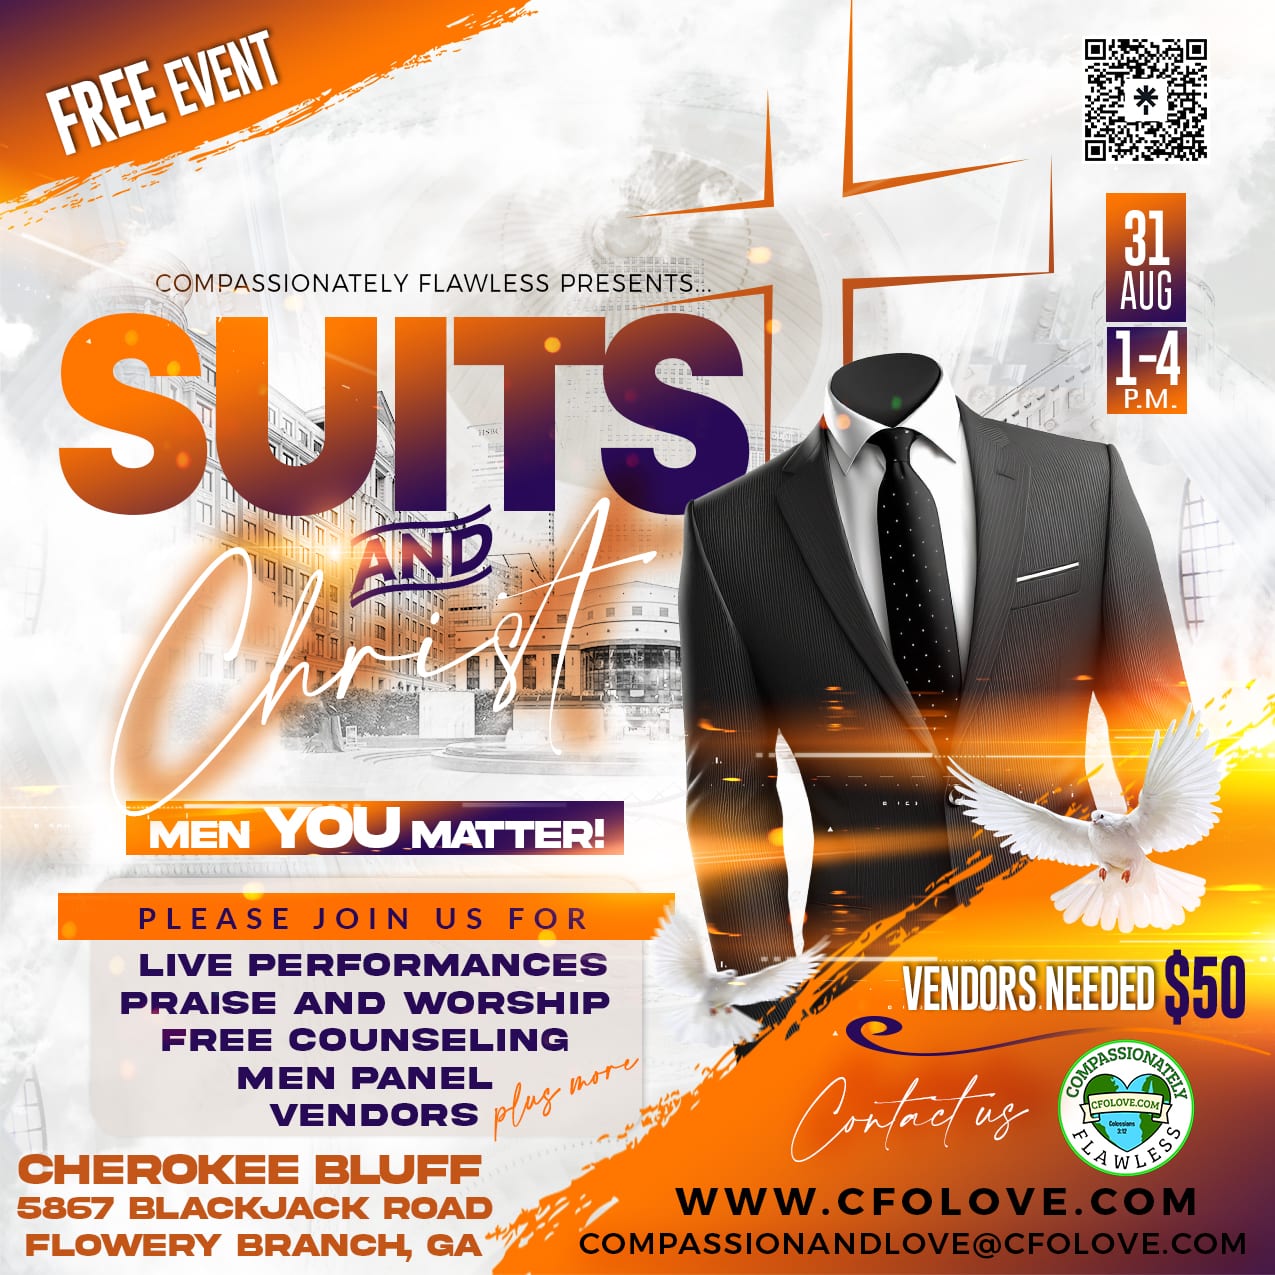 The Suits and Christ vendor fee